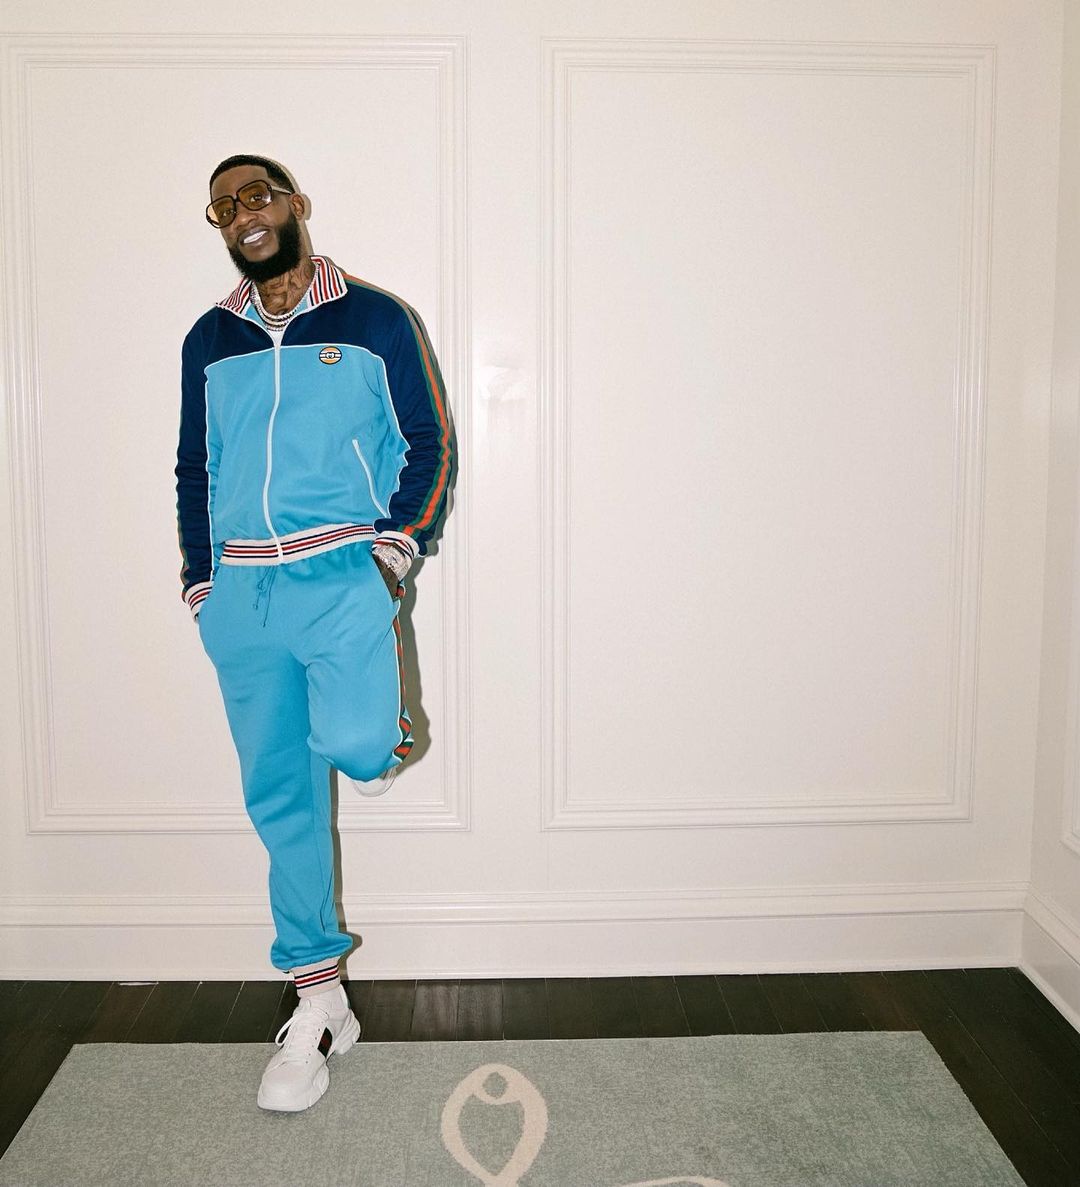 Gucci Mane Wearing a Gucci Neon Blue Tracksuit With Sunglasses & Sneakers